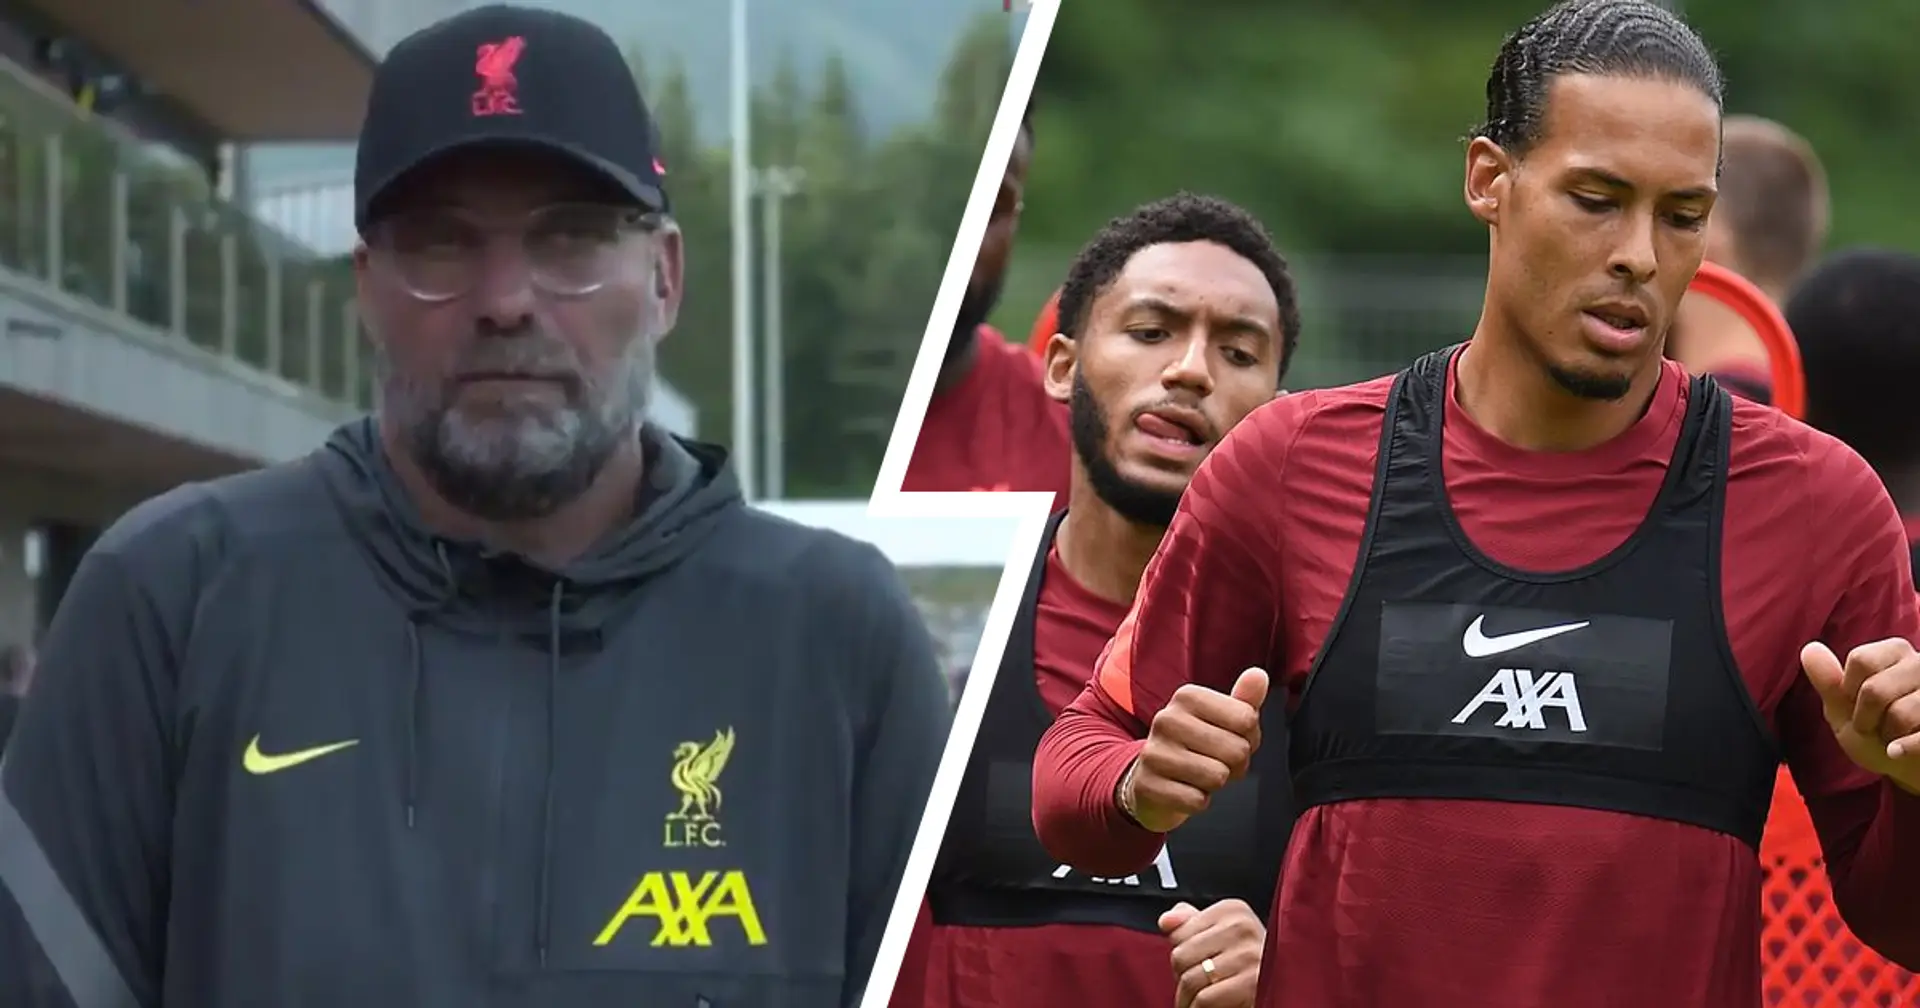 Jurgen Klopp reveals whether he expects Van Dijk and Gomez to return to pitch in next friendly